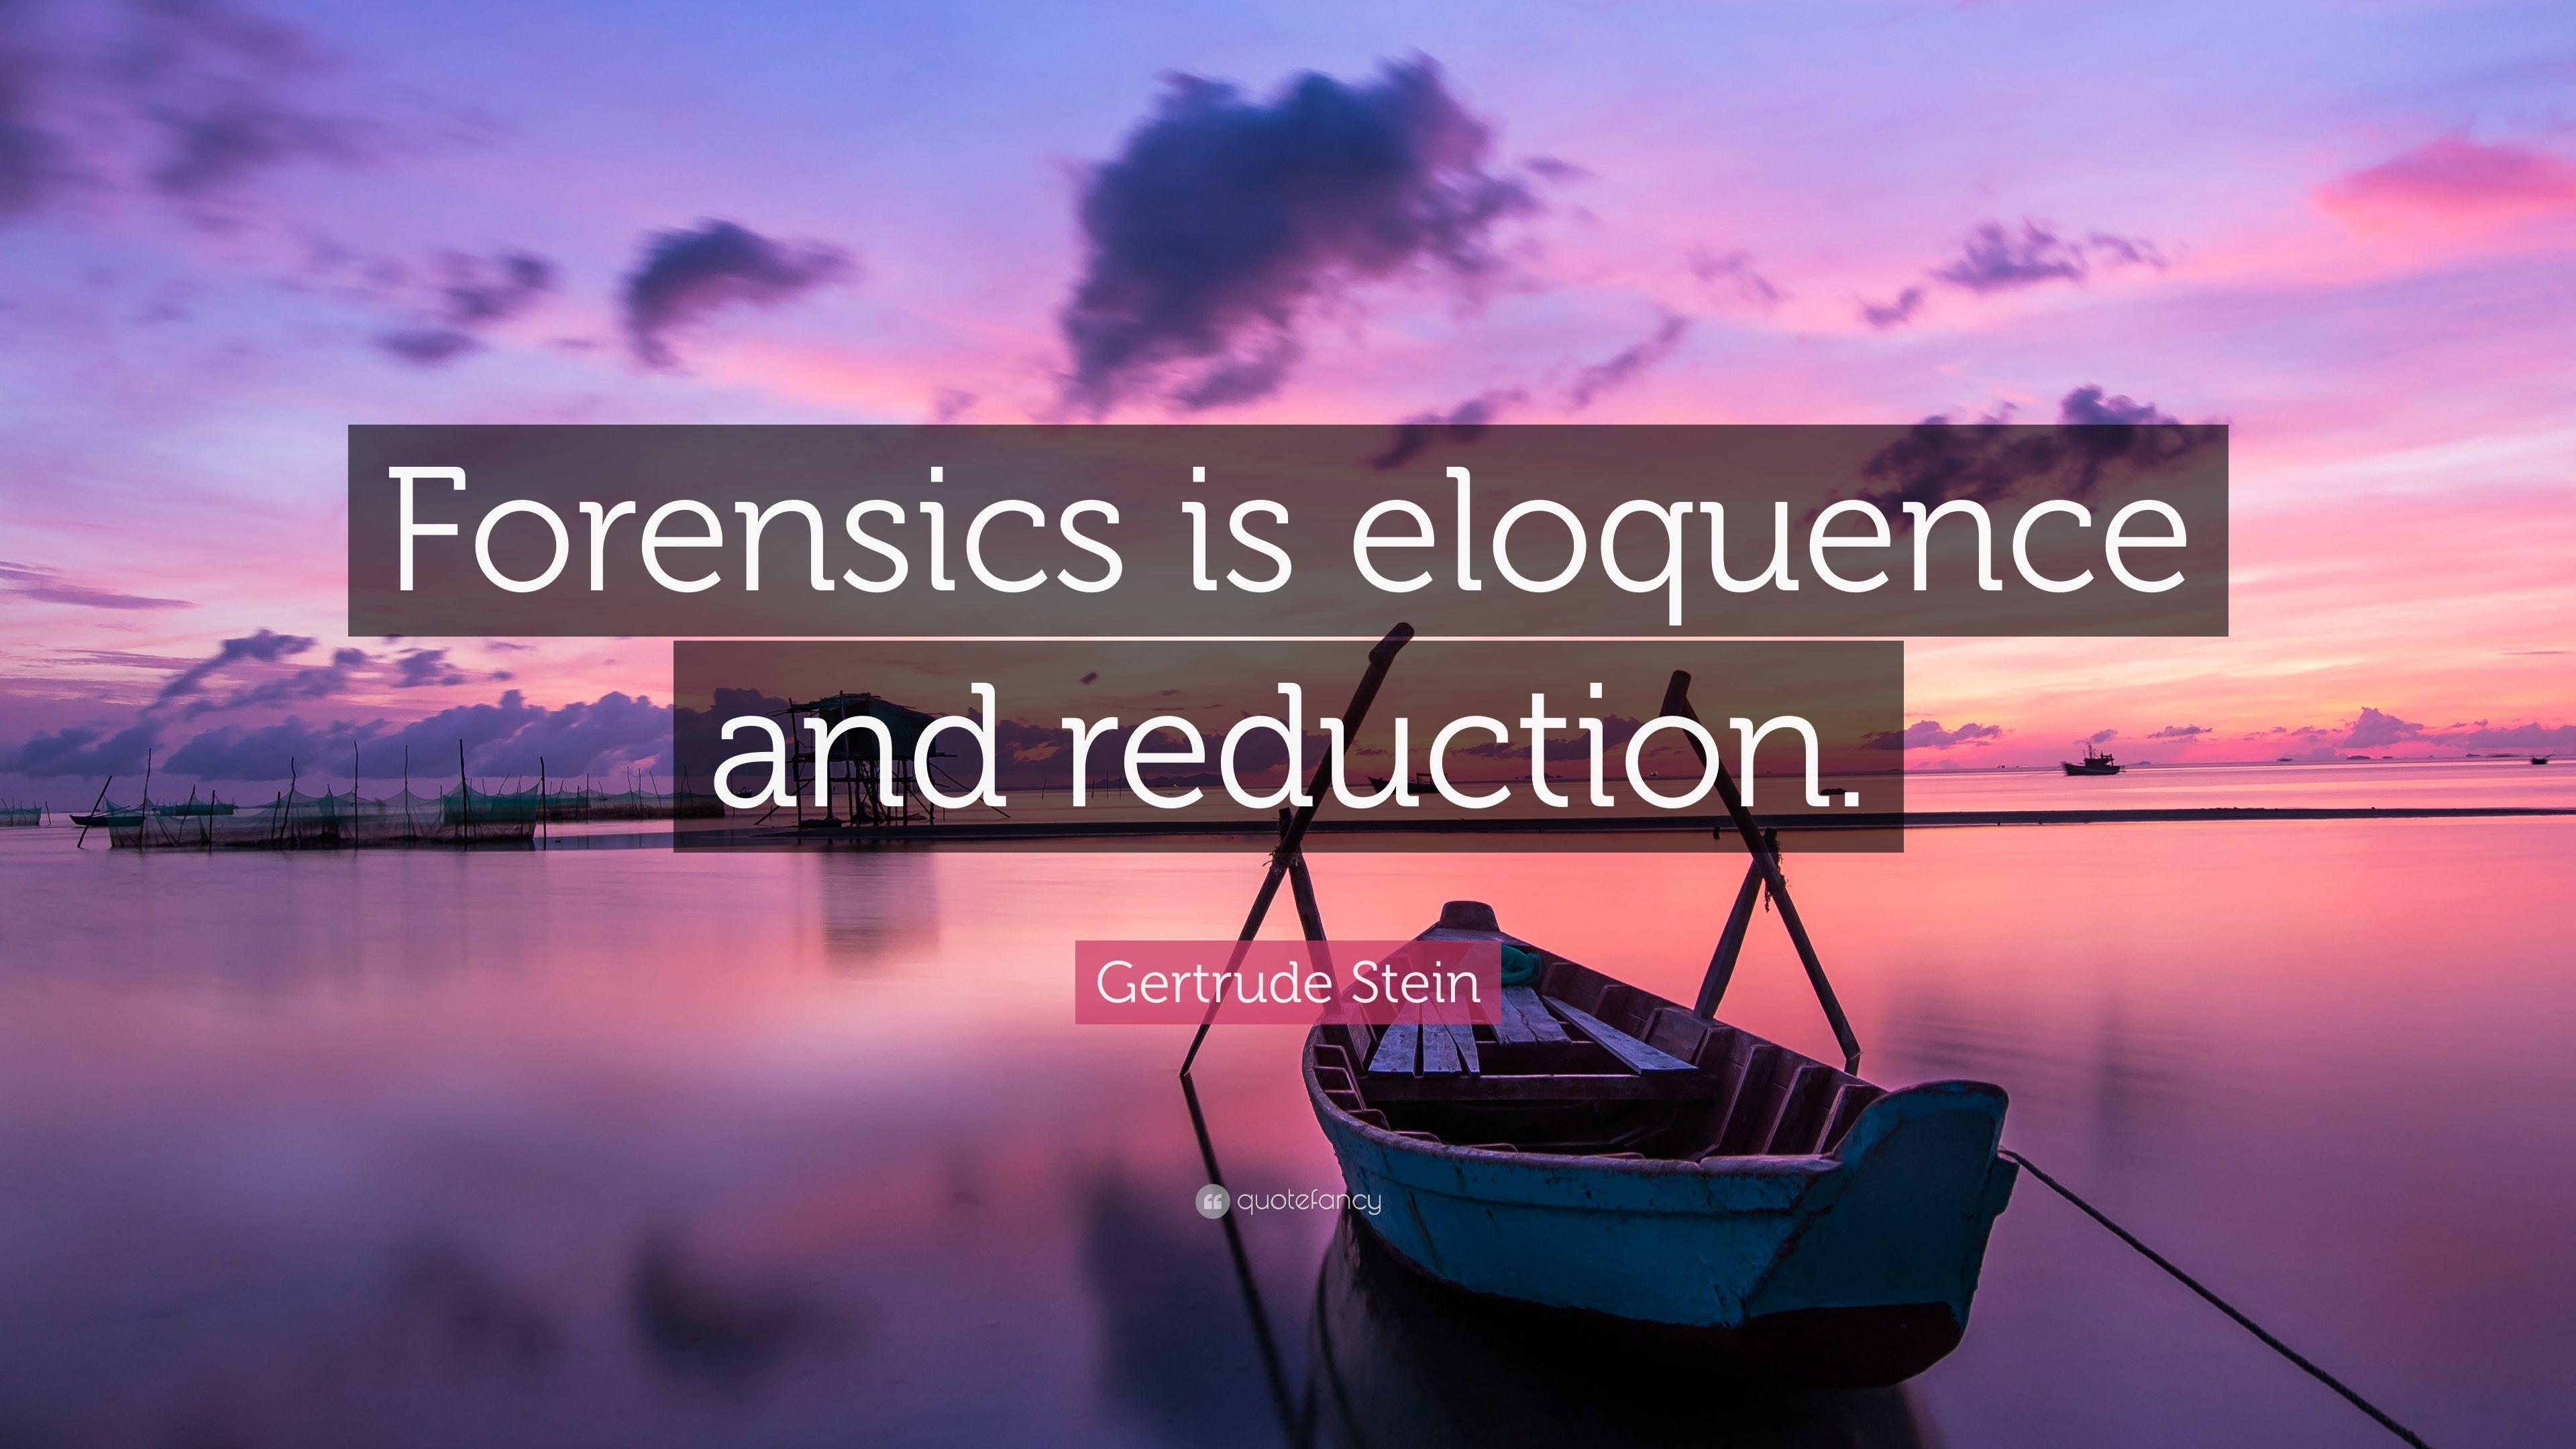 Gertrude Stein Quote: “Forensics is eloquence and reduction.” 6